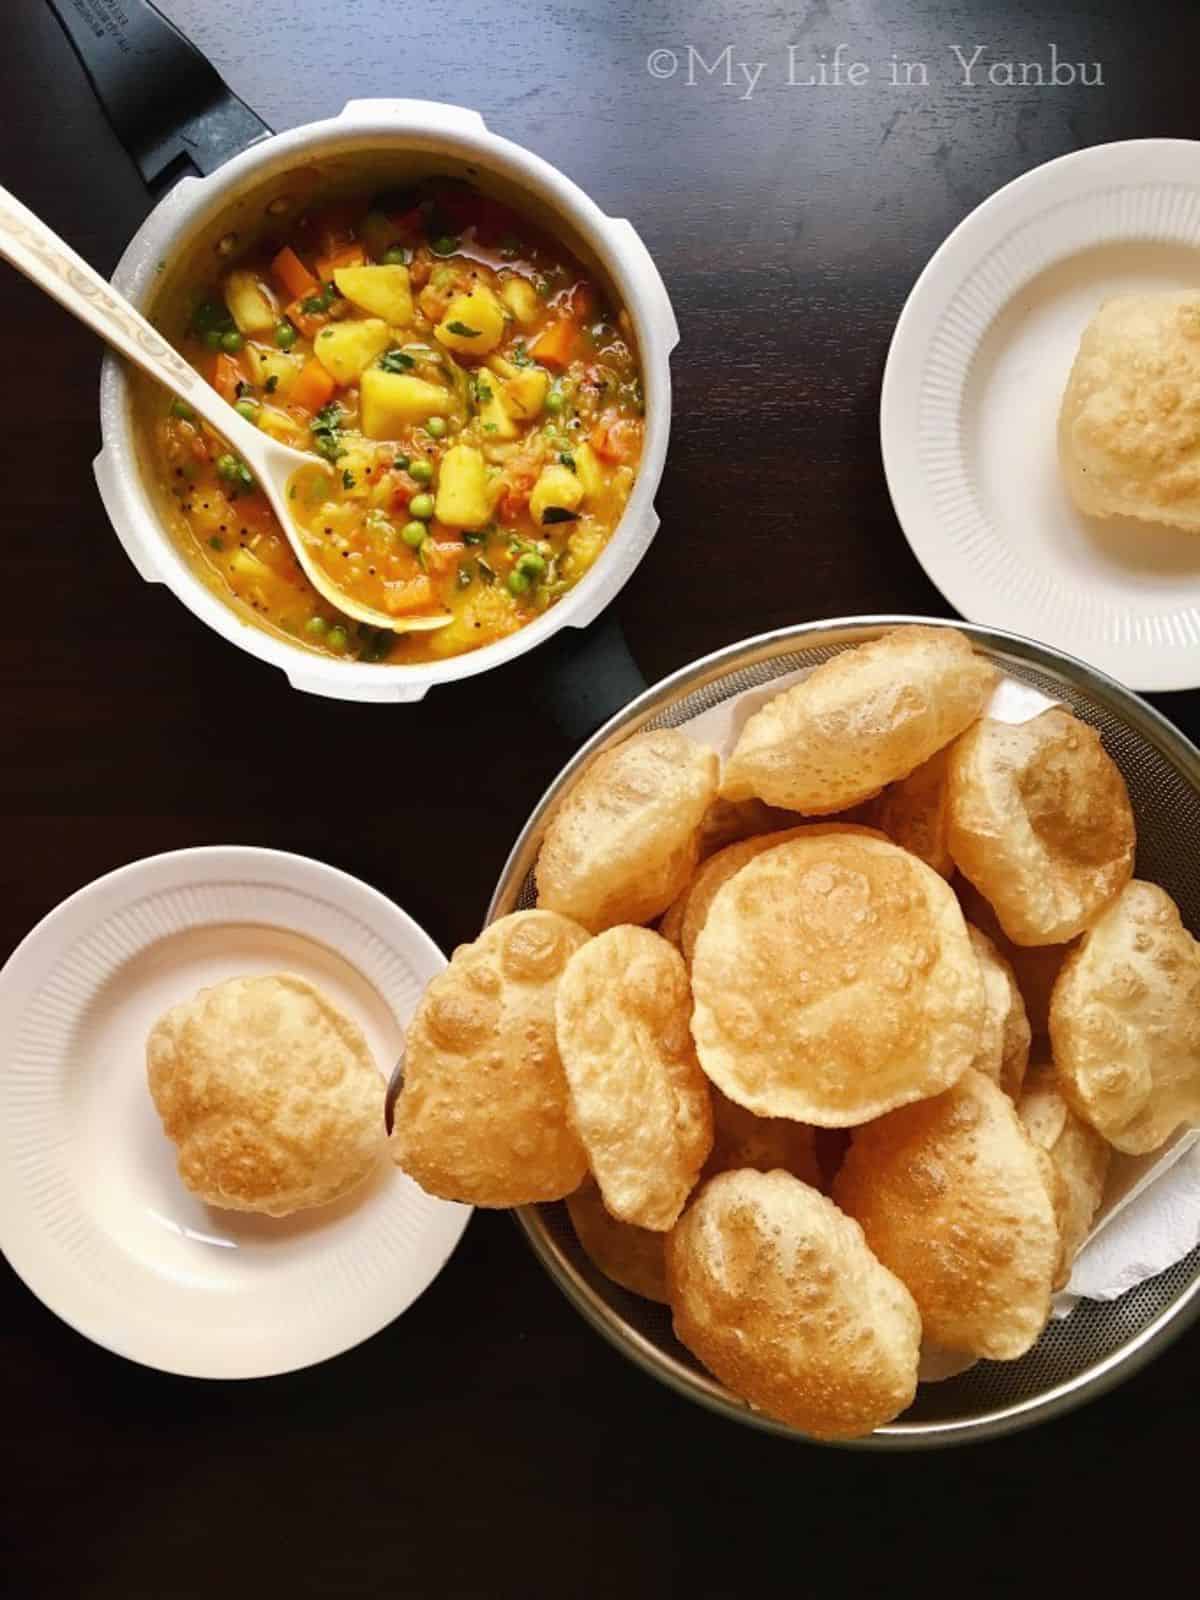 a basket of luchi bread served with aloo masala